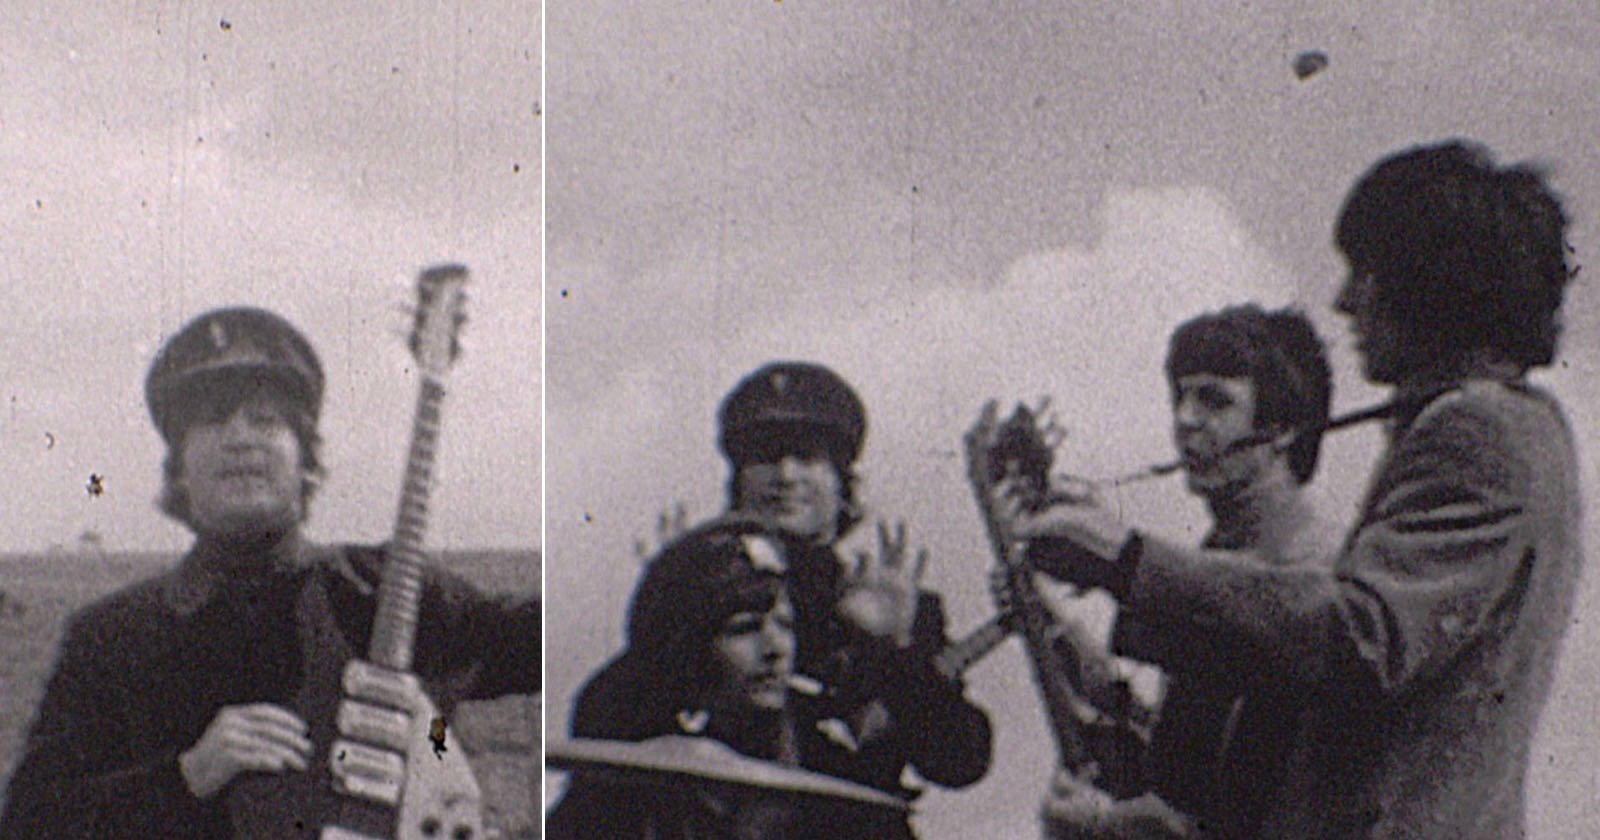  unseen 8mm footage beatles expected sell 